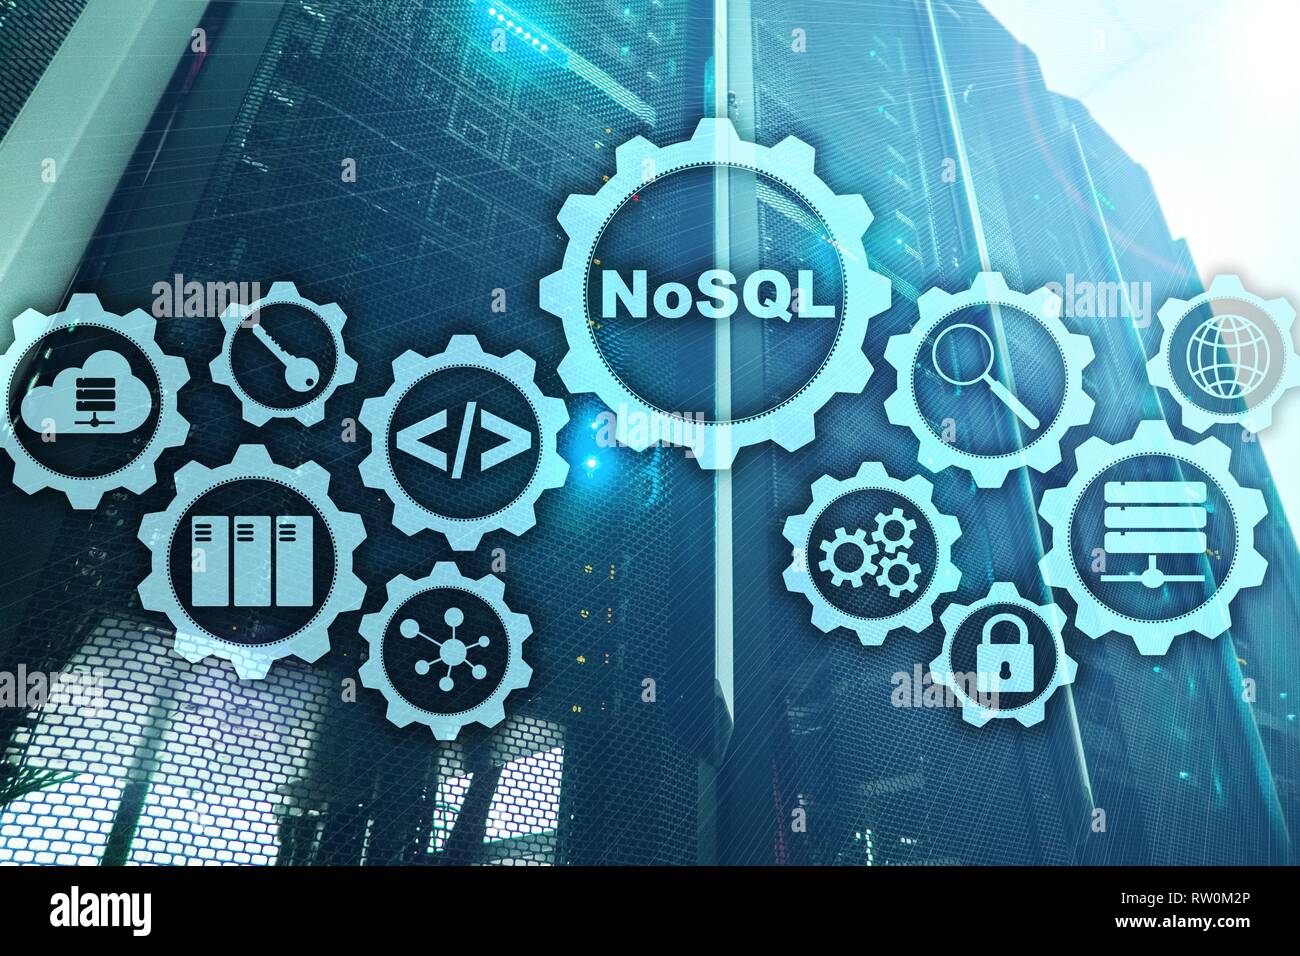 NoSQL. Structured Query Language. Database Technology Concept. Server room background. Stock Photo